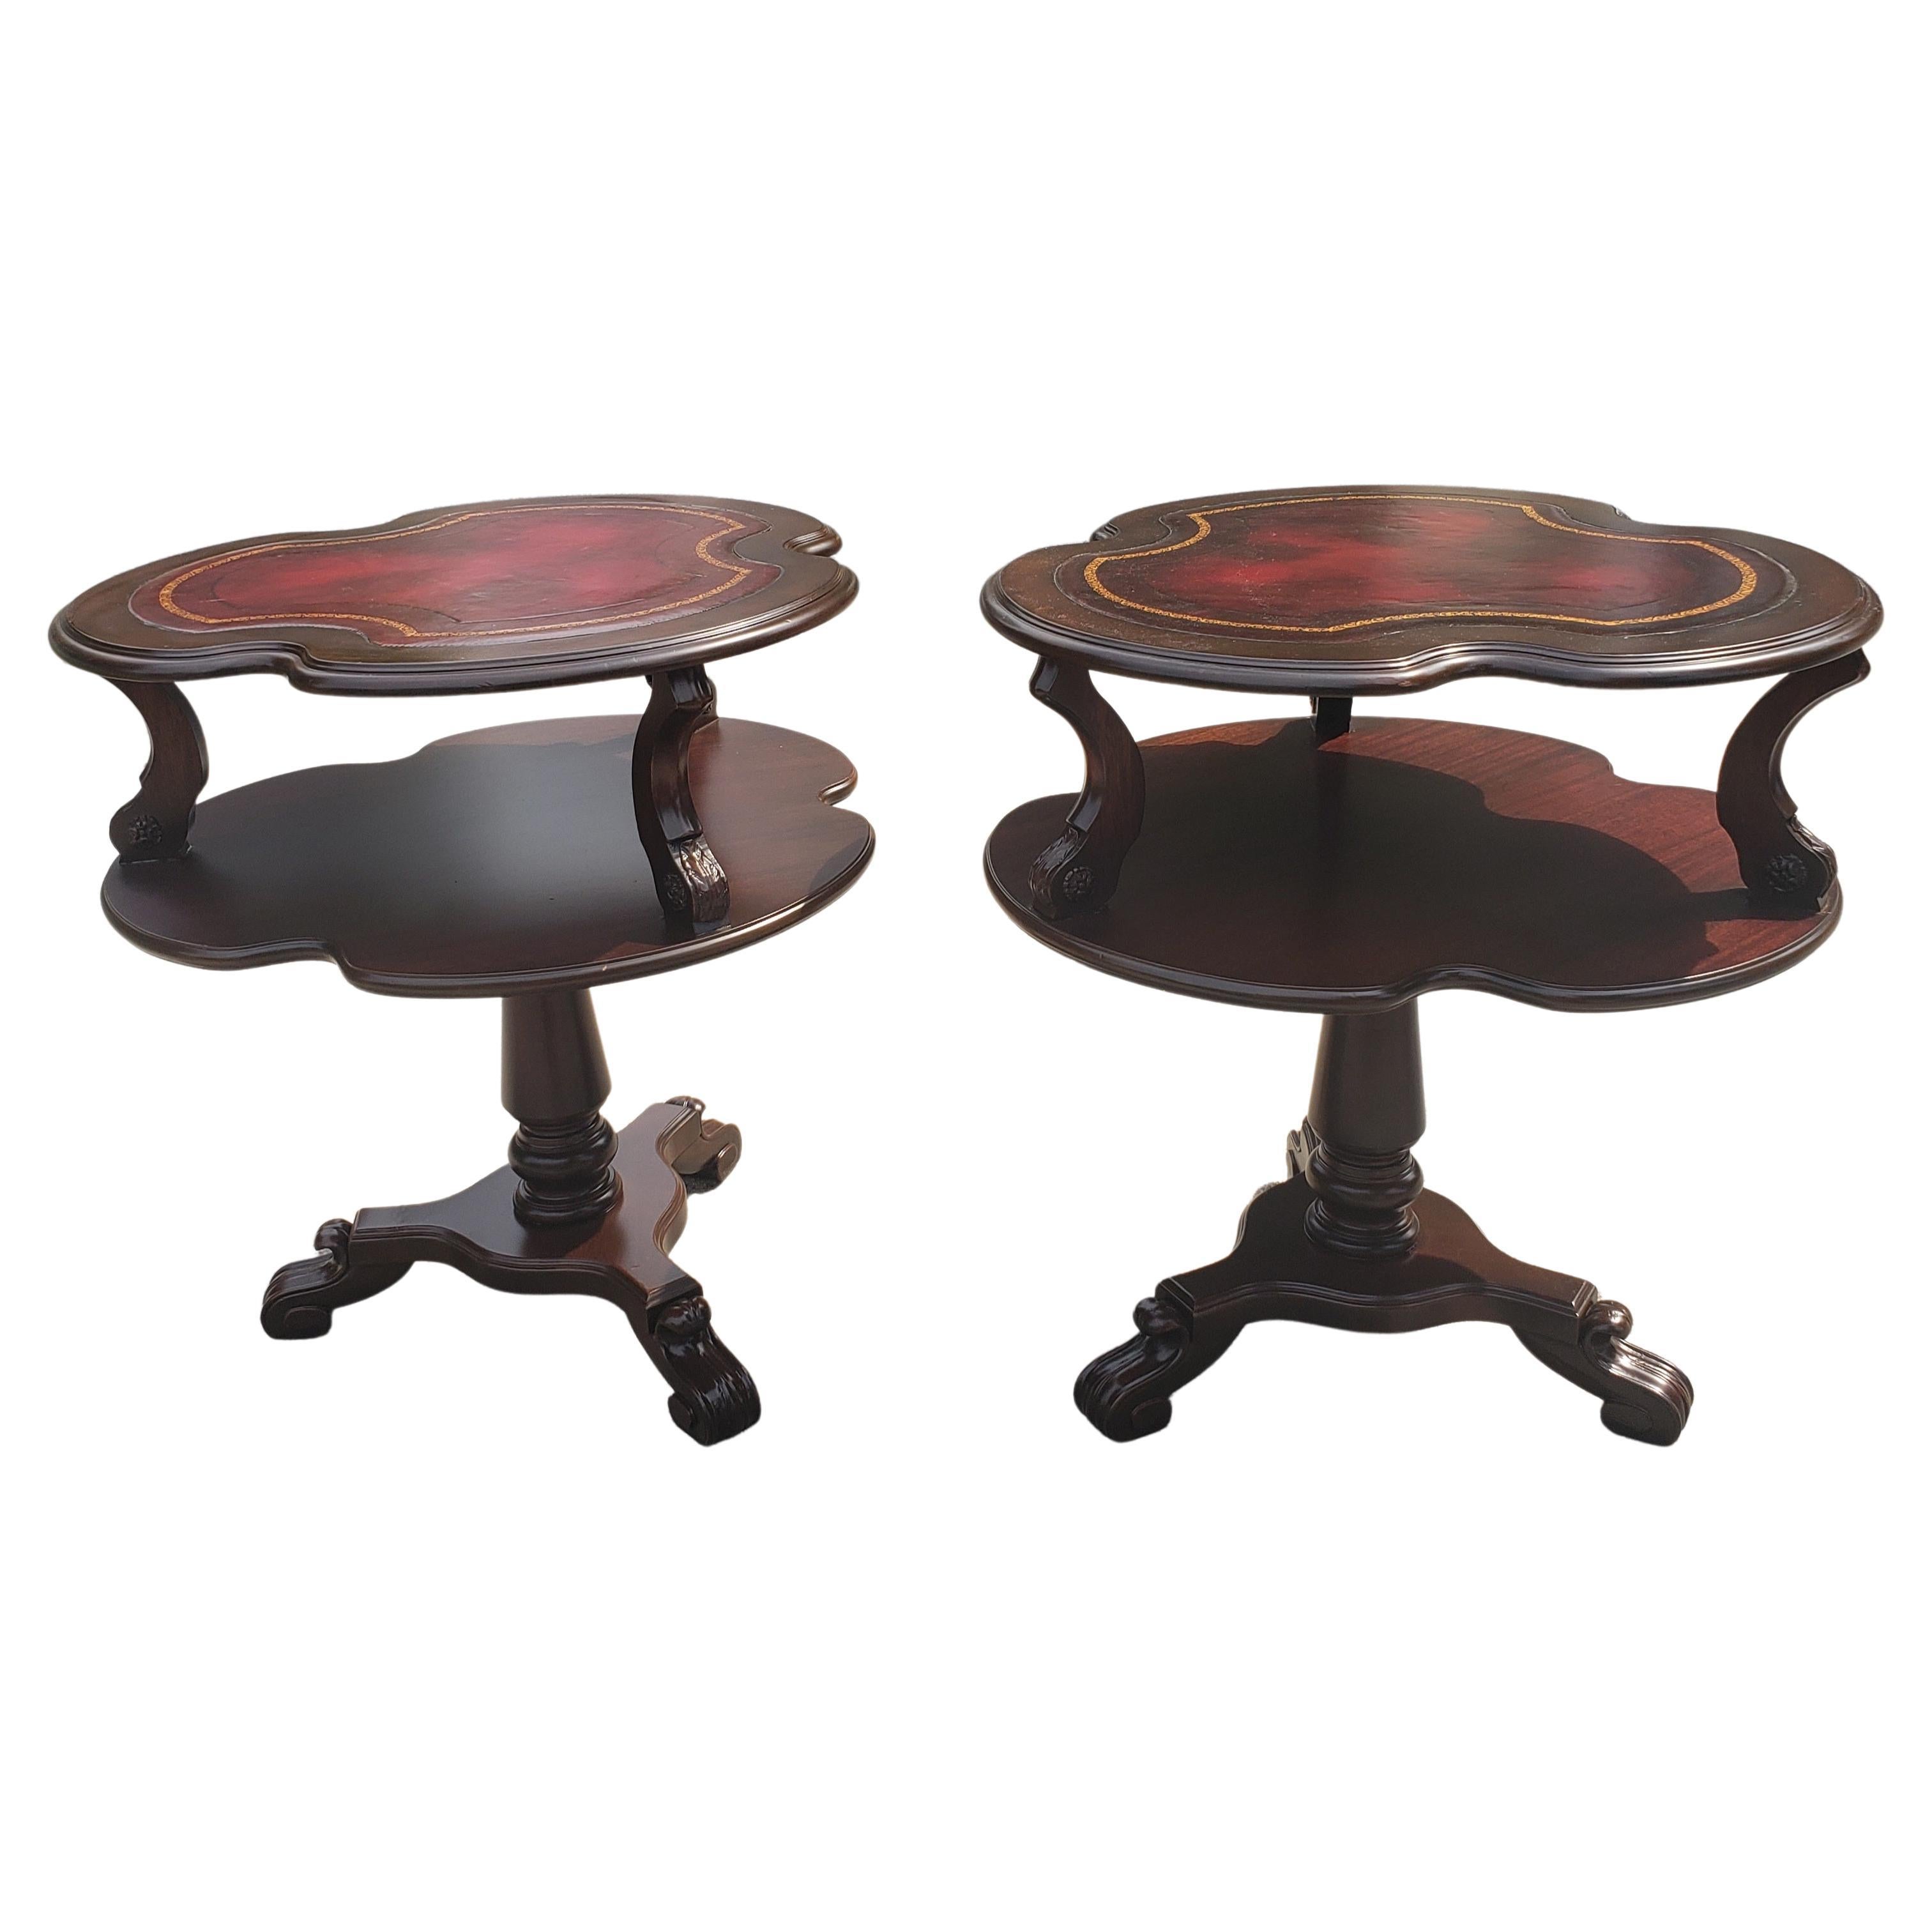 Stunning, refinished English Regency two-tier maroon leather top insert side tables. Pedestal Tripod legs terminating with paw feet. Just been professionally refinished, with antiqued used leather top insert preserved. Leather gold Stenciling in